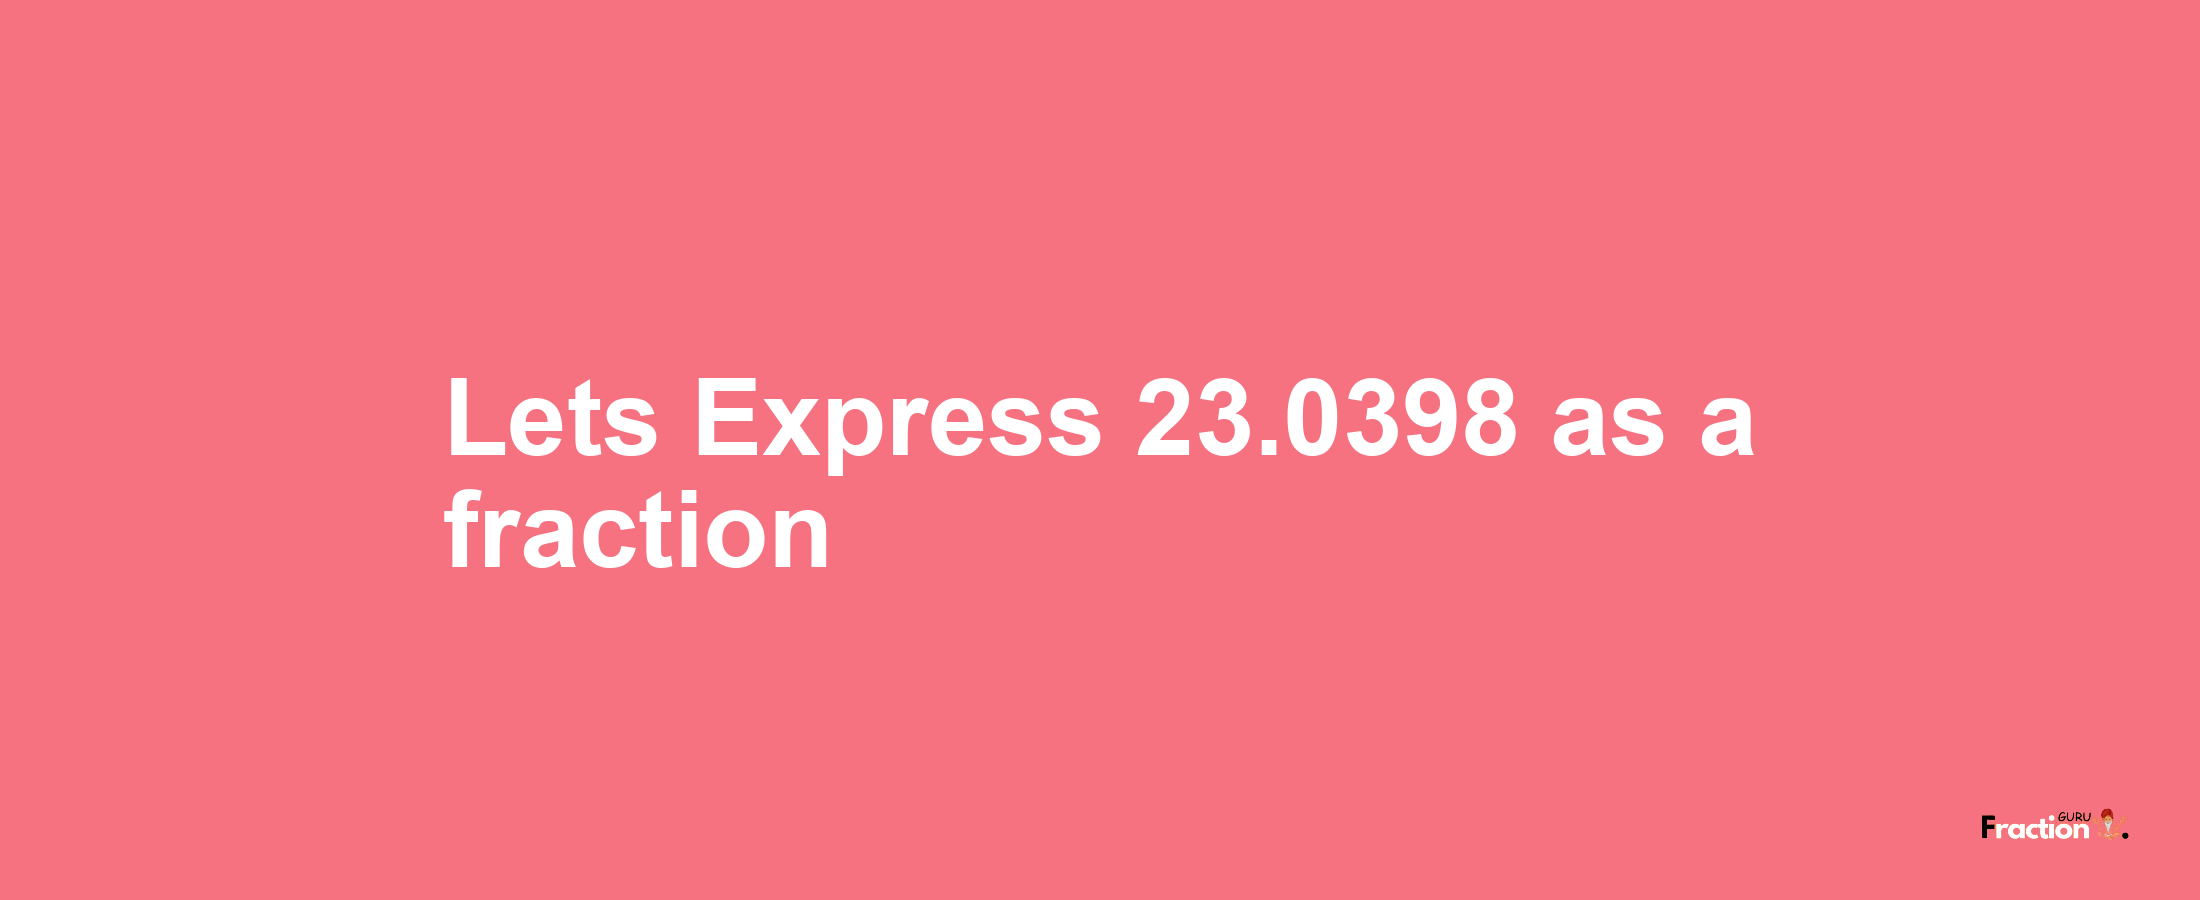 Lets Express 23.0398 as afraction